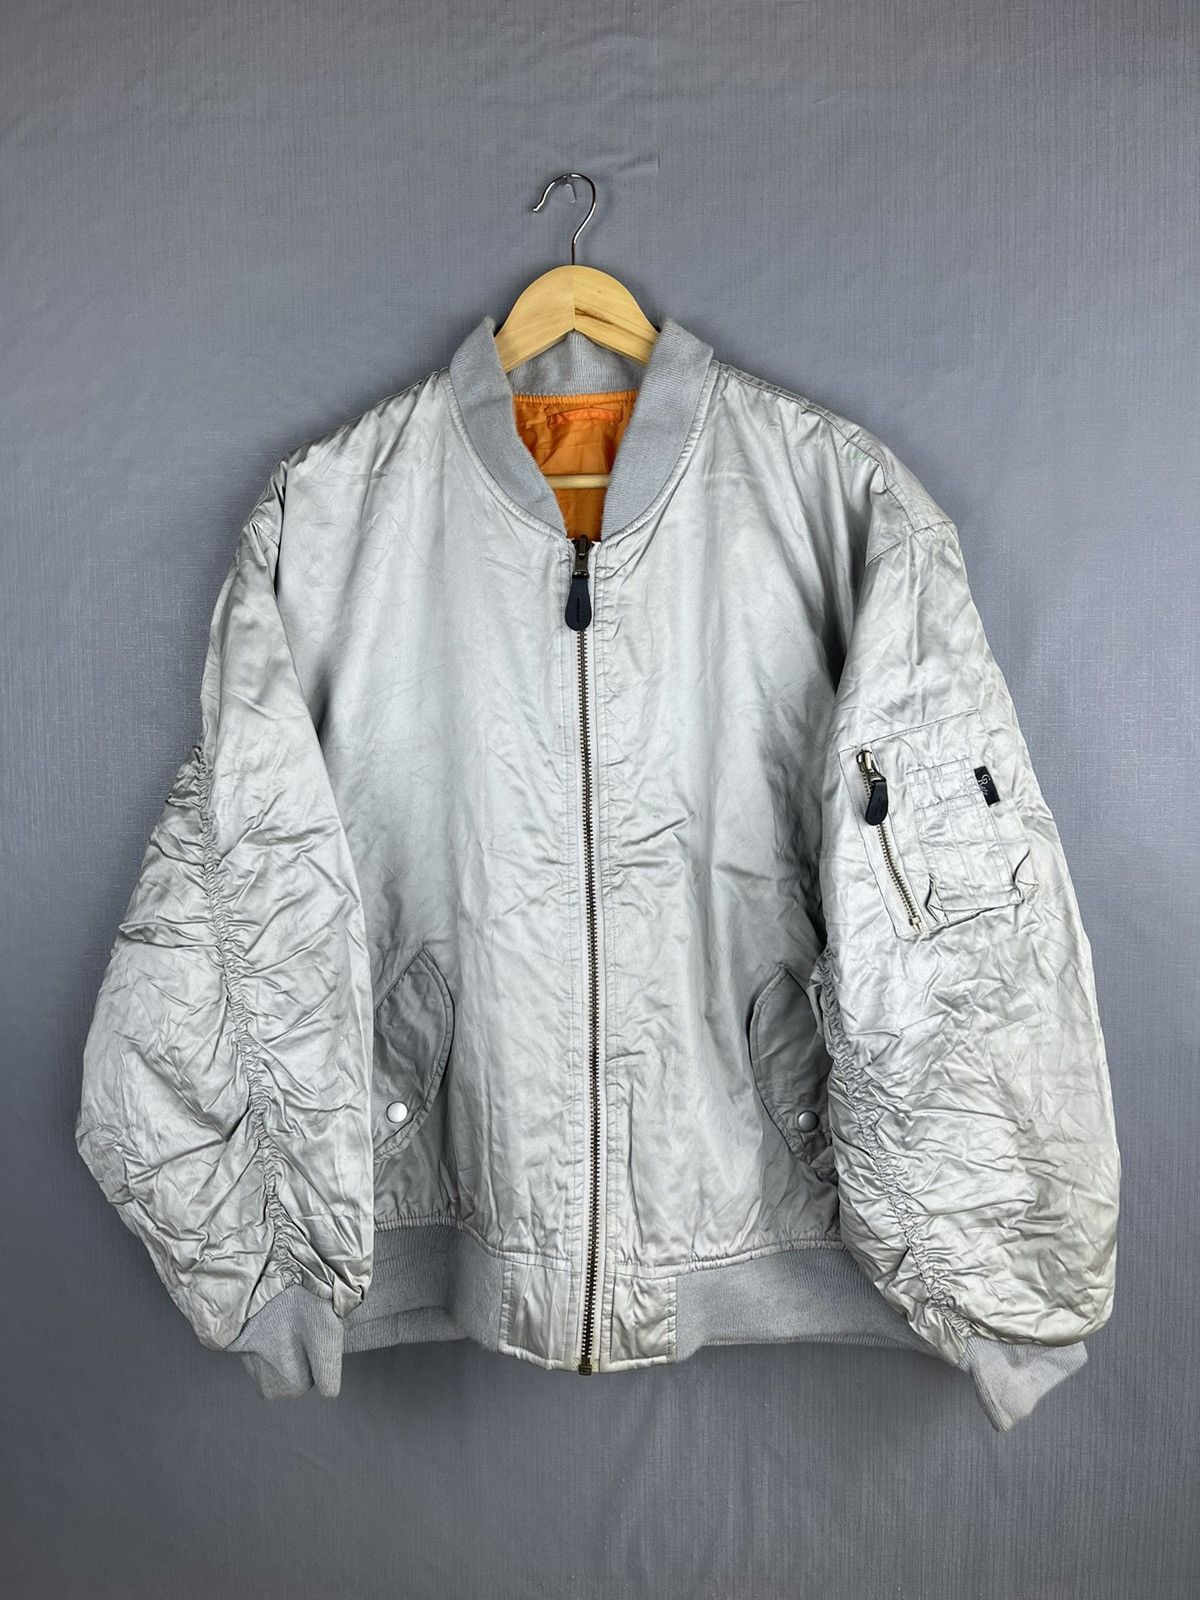 Pre-owned Bomber Jacket X Vintage Crete Inc. Type Ma-1 Reversible Bomber Jacket In Silver